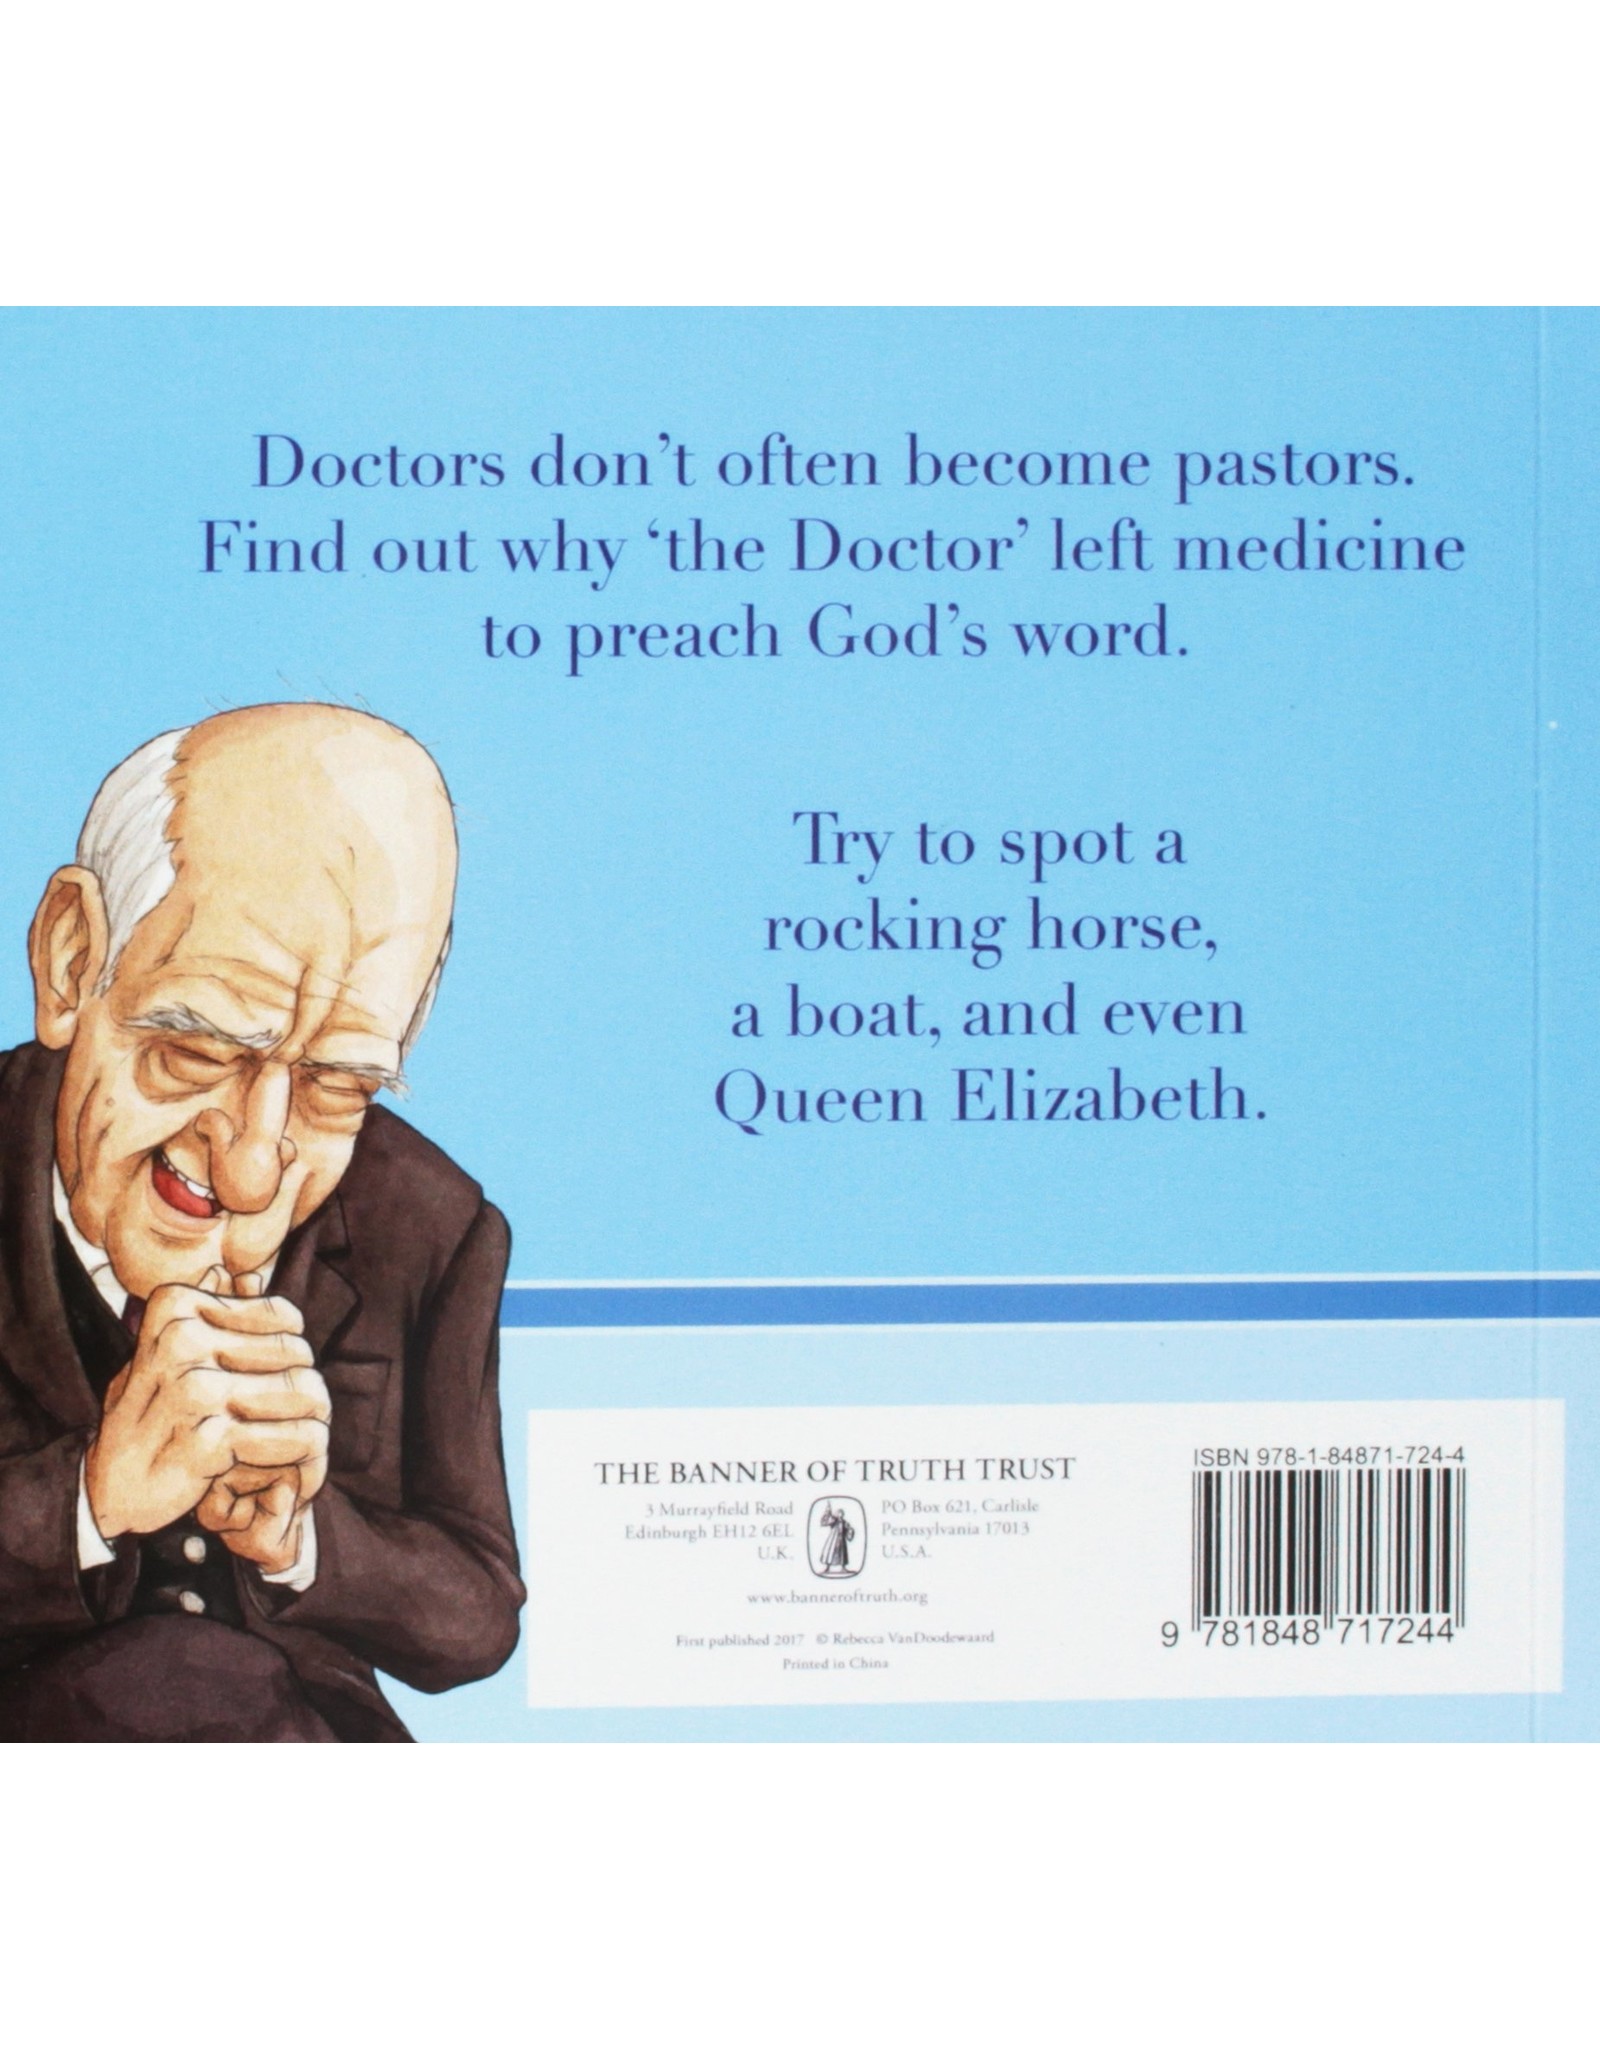 Banner of Truth The Doctor Who Became a Preacher: Martyn Lloyd-Jones